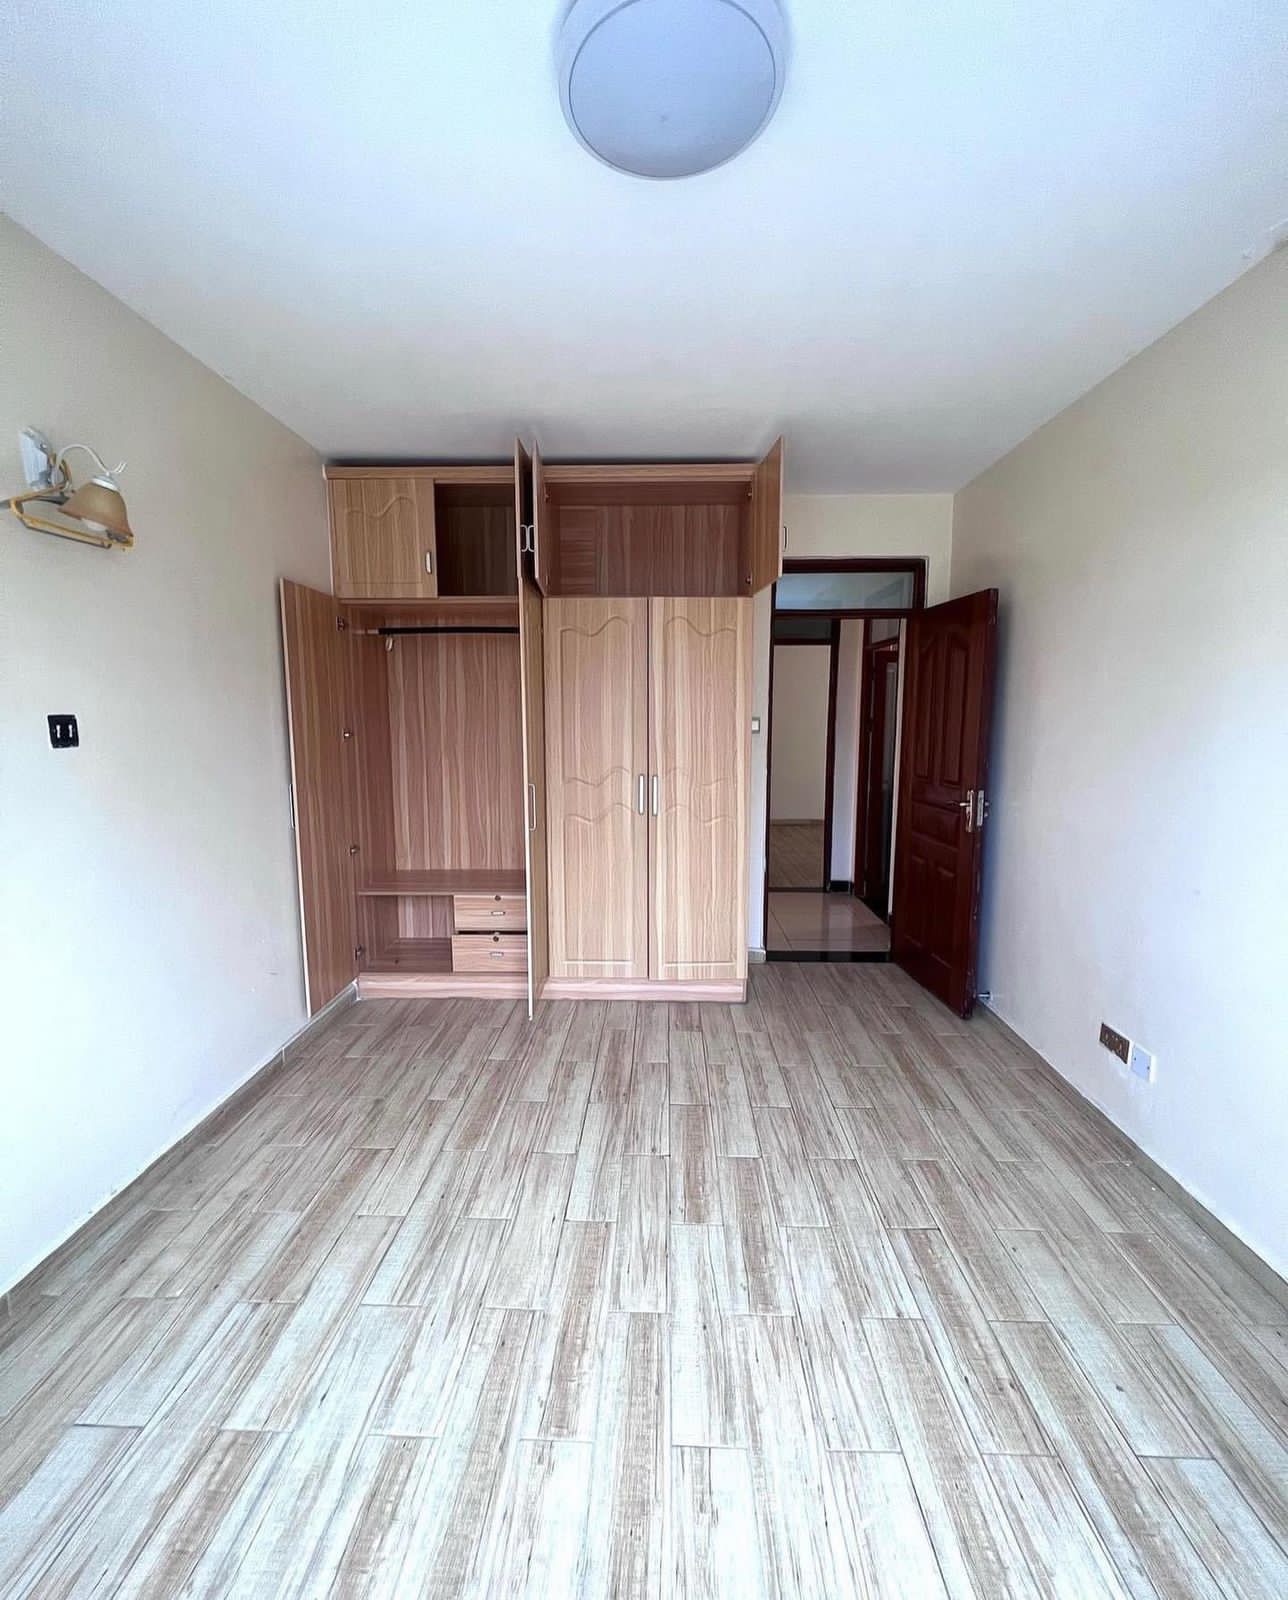 2 Bedroom Apartment Master En-suite at Kilimani for Kshs.60,000. Back-up generator. Borehole. Gym. Kids play area. High speed lifts. On 1st floor. Musilli Homes